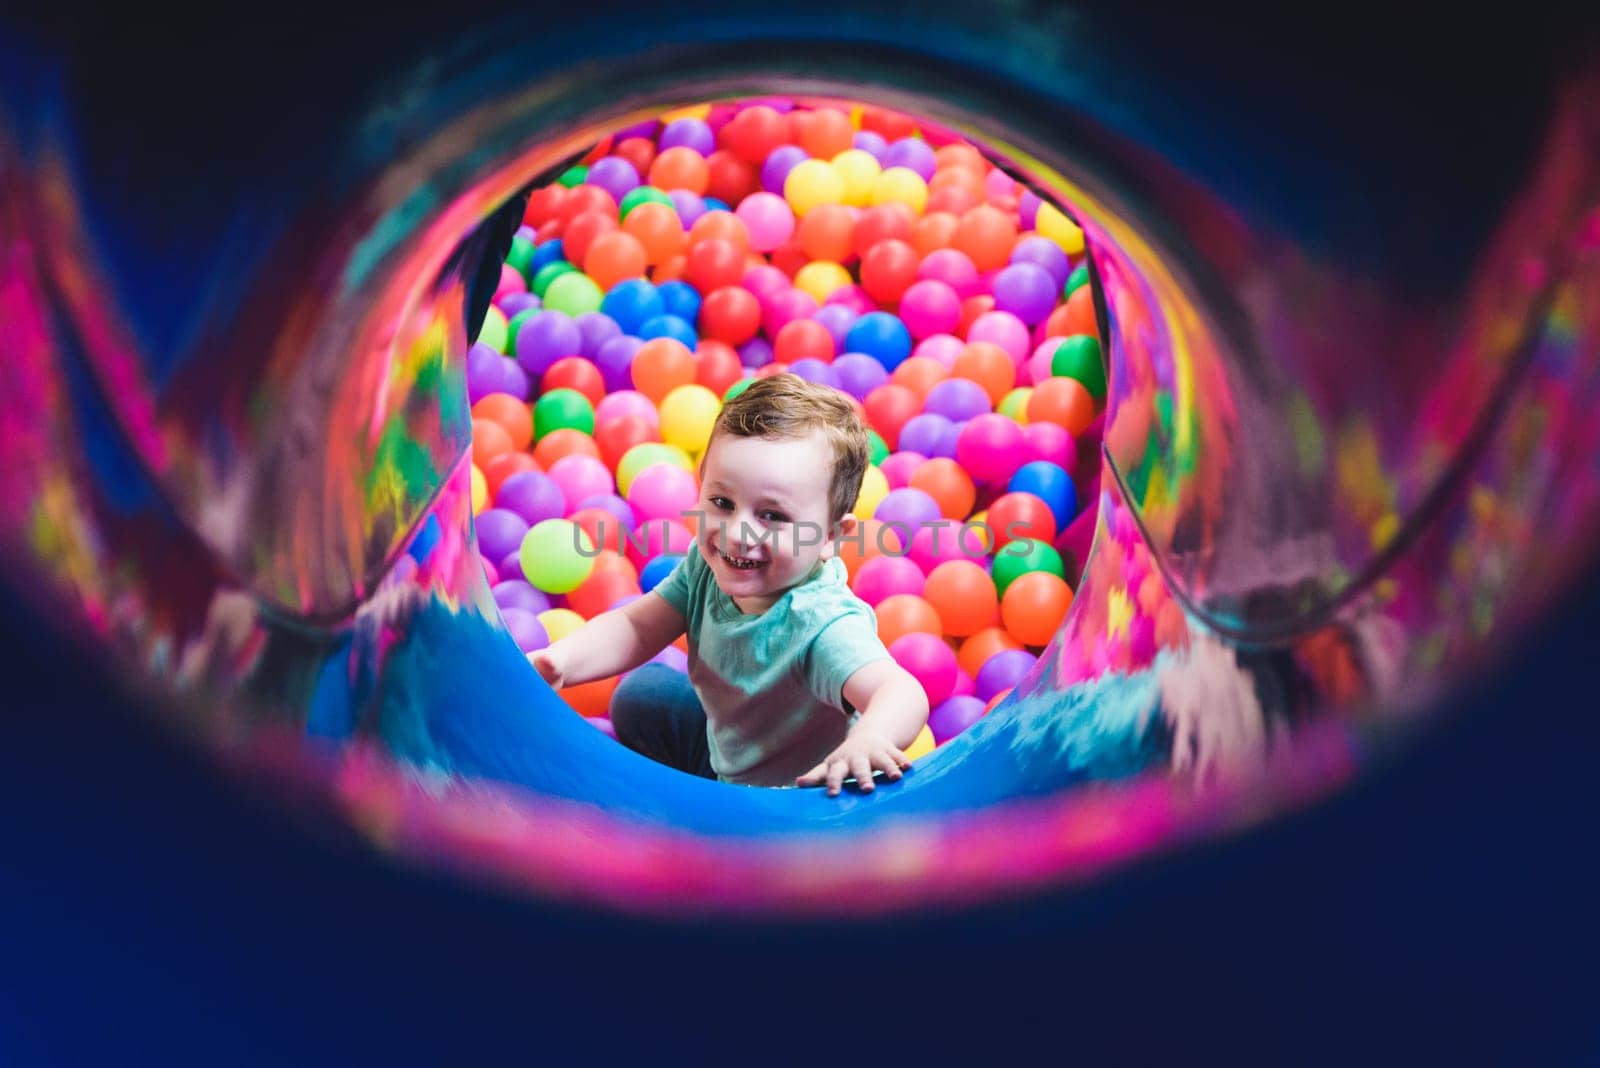 Child on the playground with colored plastic balls by jcdiazhidalgo